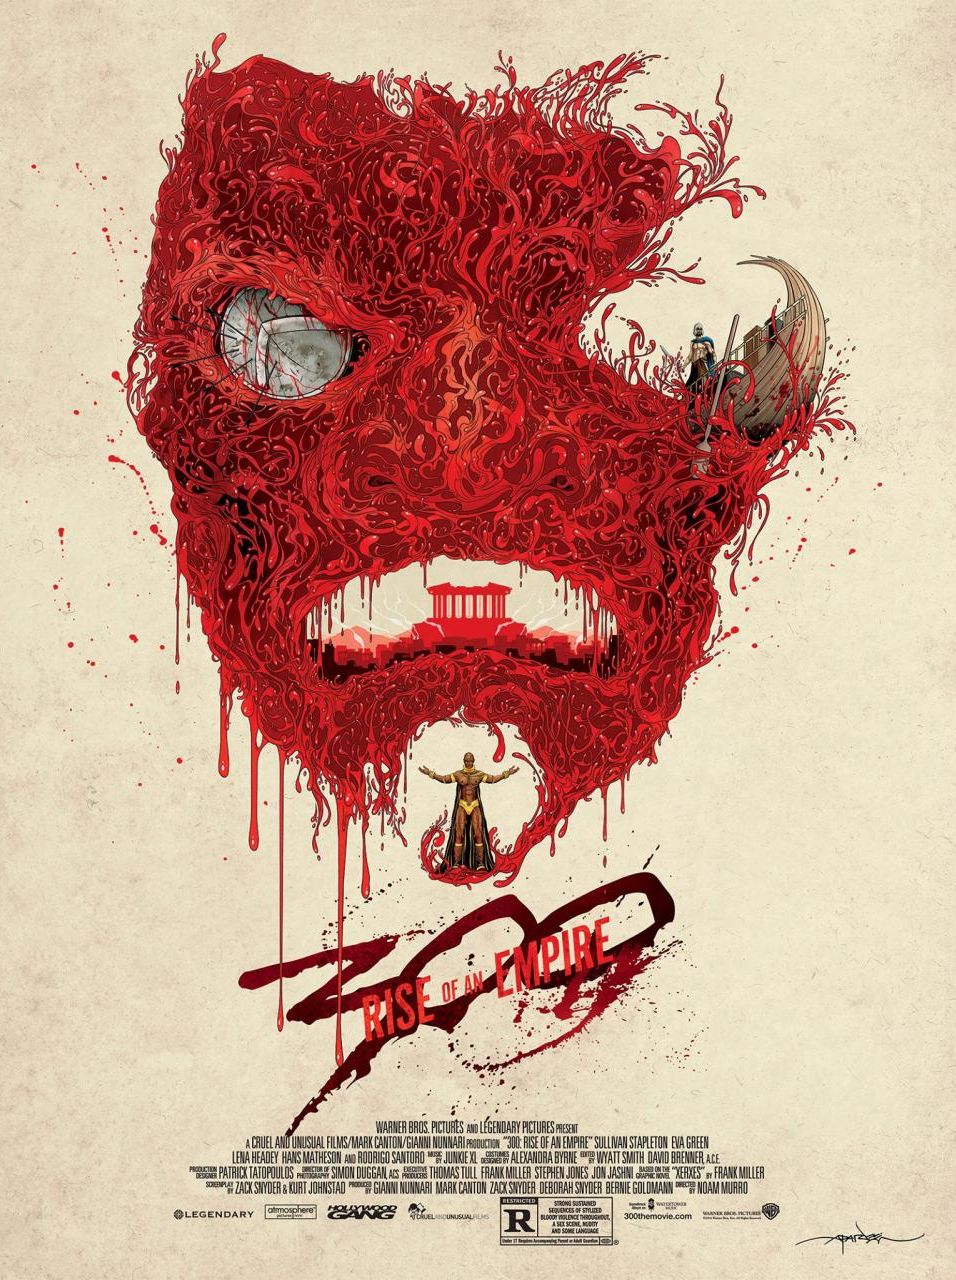 300: Rise Of An Empire in cinemas March 2014